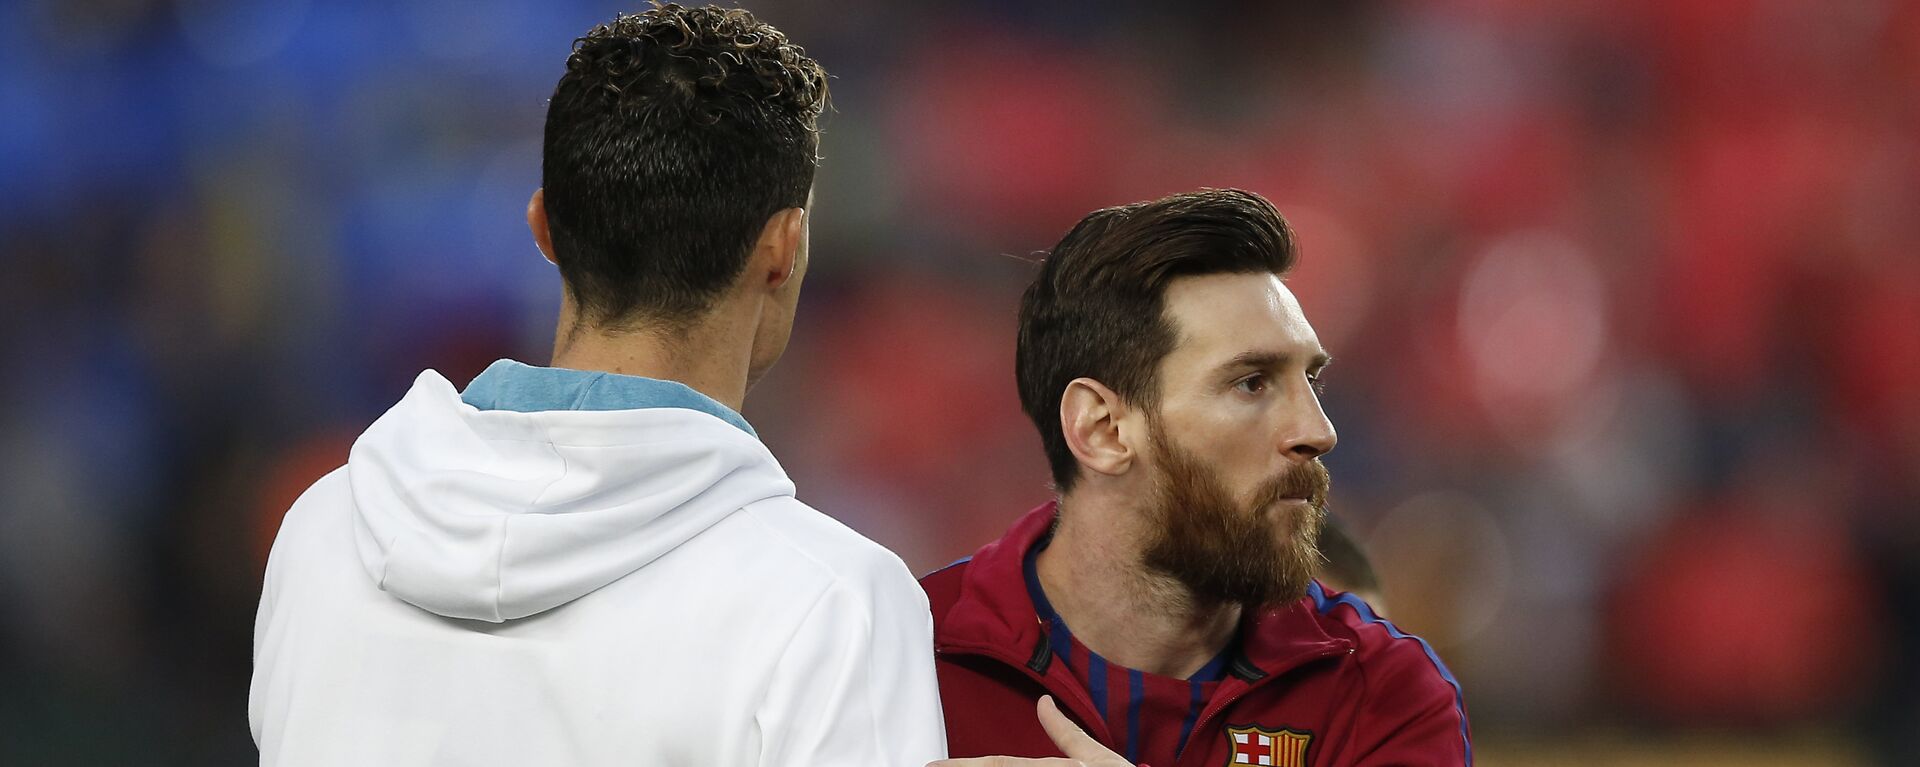 Barcelona's Lionel Messi, right and Real Madrid's Cristiano Ronaldo greets each other before a Spanish La Liga soccer match between Barcelona and Real Madrid, dubbed 'el clasico', at the Camp Nou stadium in Barcelona, Spain, Sunday, May 6, 2018 - اسپوتنیک افغانستان  , 1920, 21.02.2022